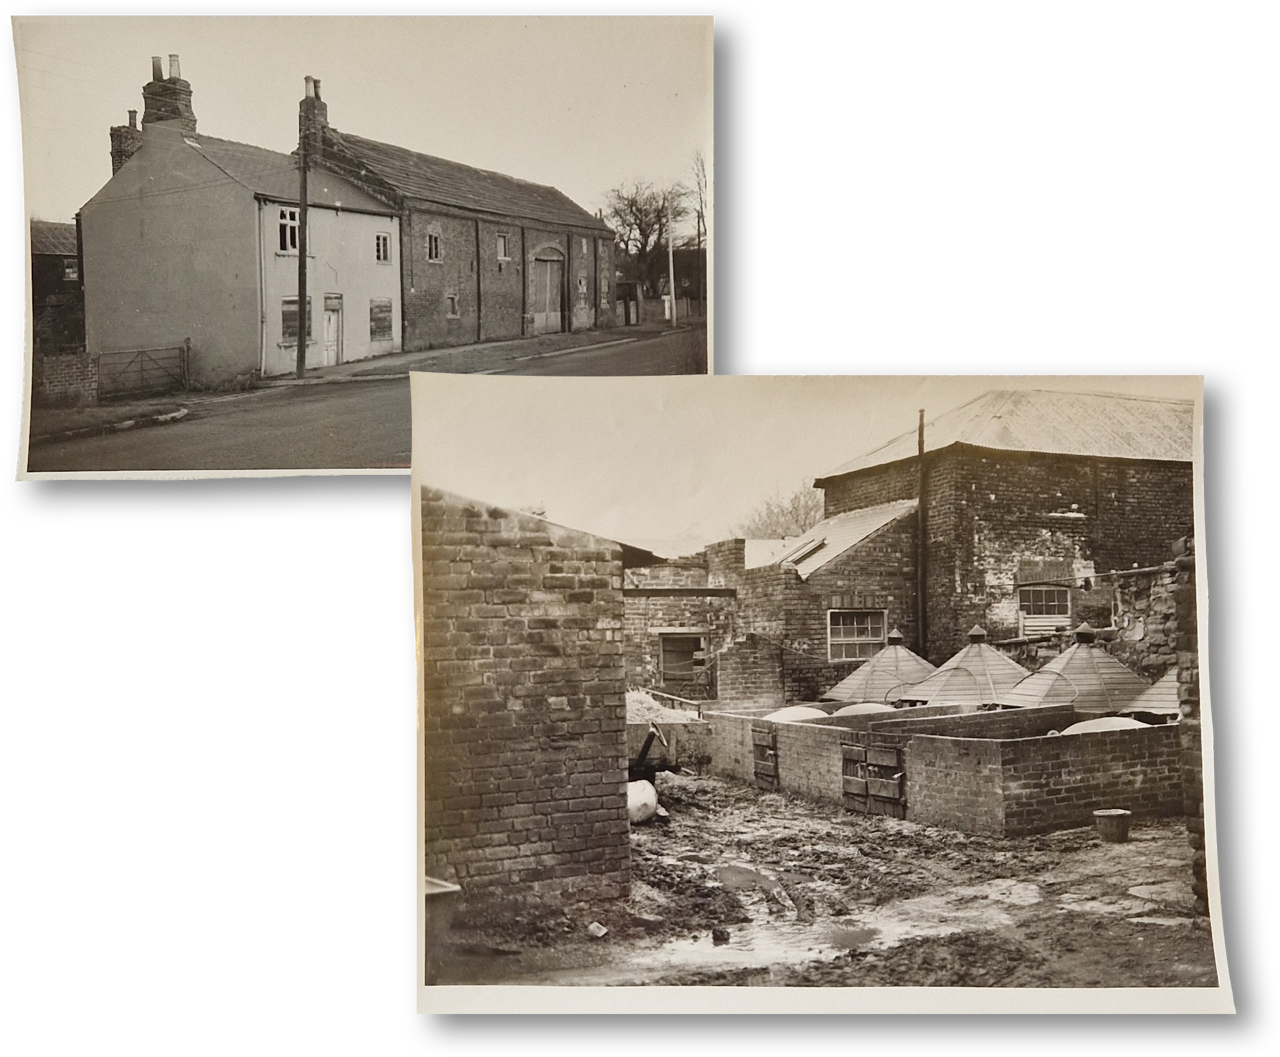 Two old black and white photographs, one shows a house with an adjoining barn and the other shows farm buildings and pig pens, the foreground is muddy.